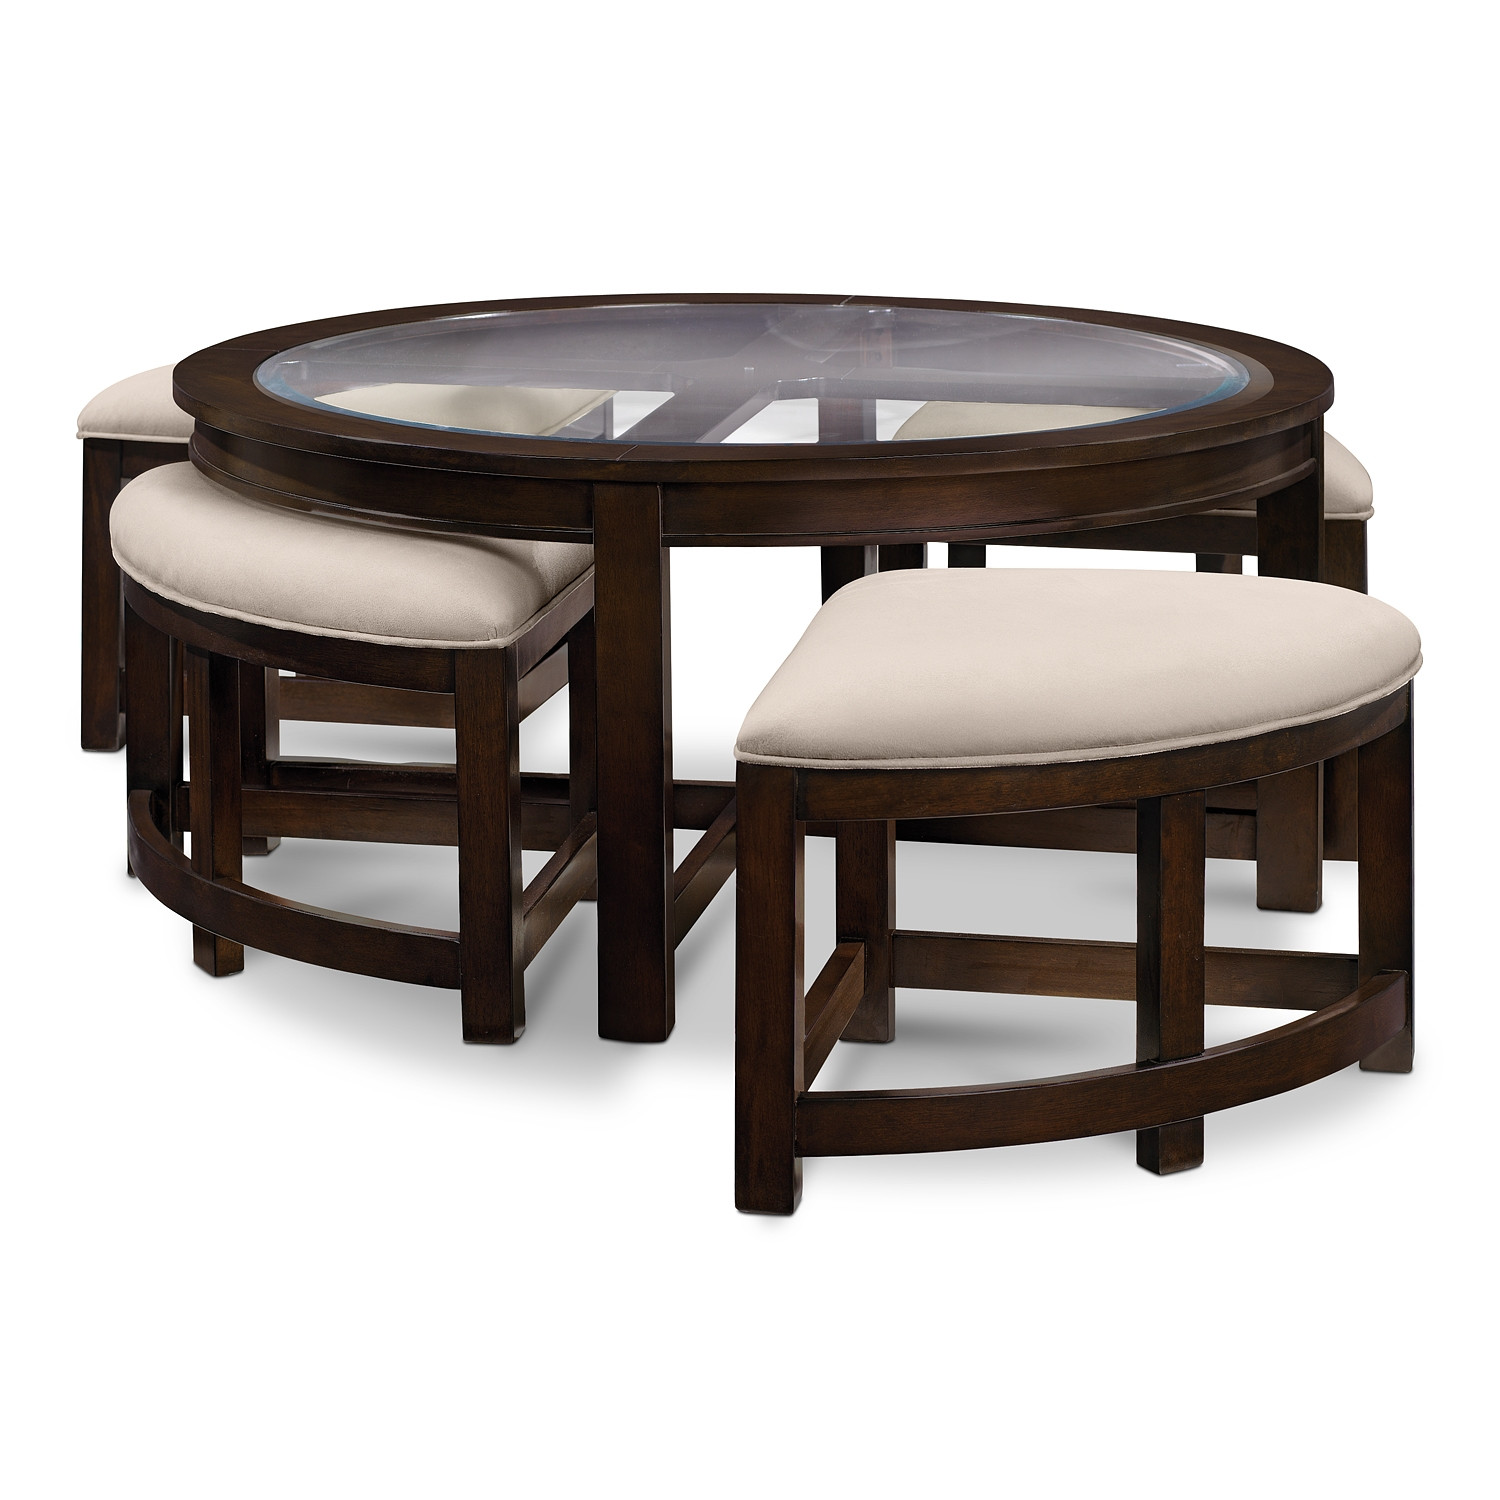 Value City Living Room Tables
 8 Value City Furniture Round Coffee Tables